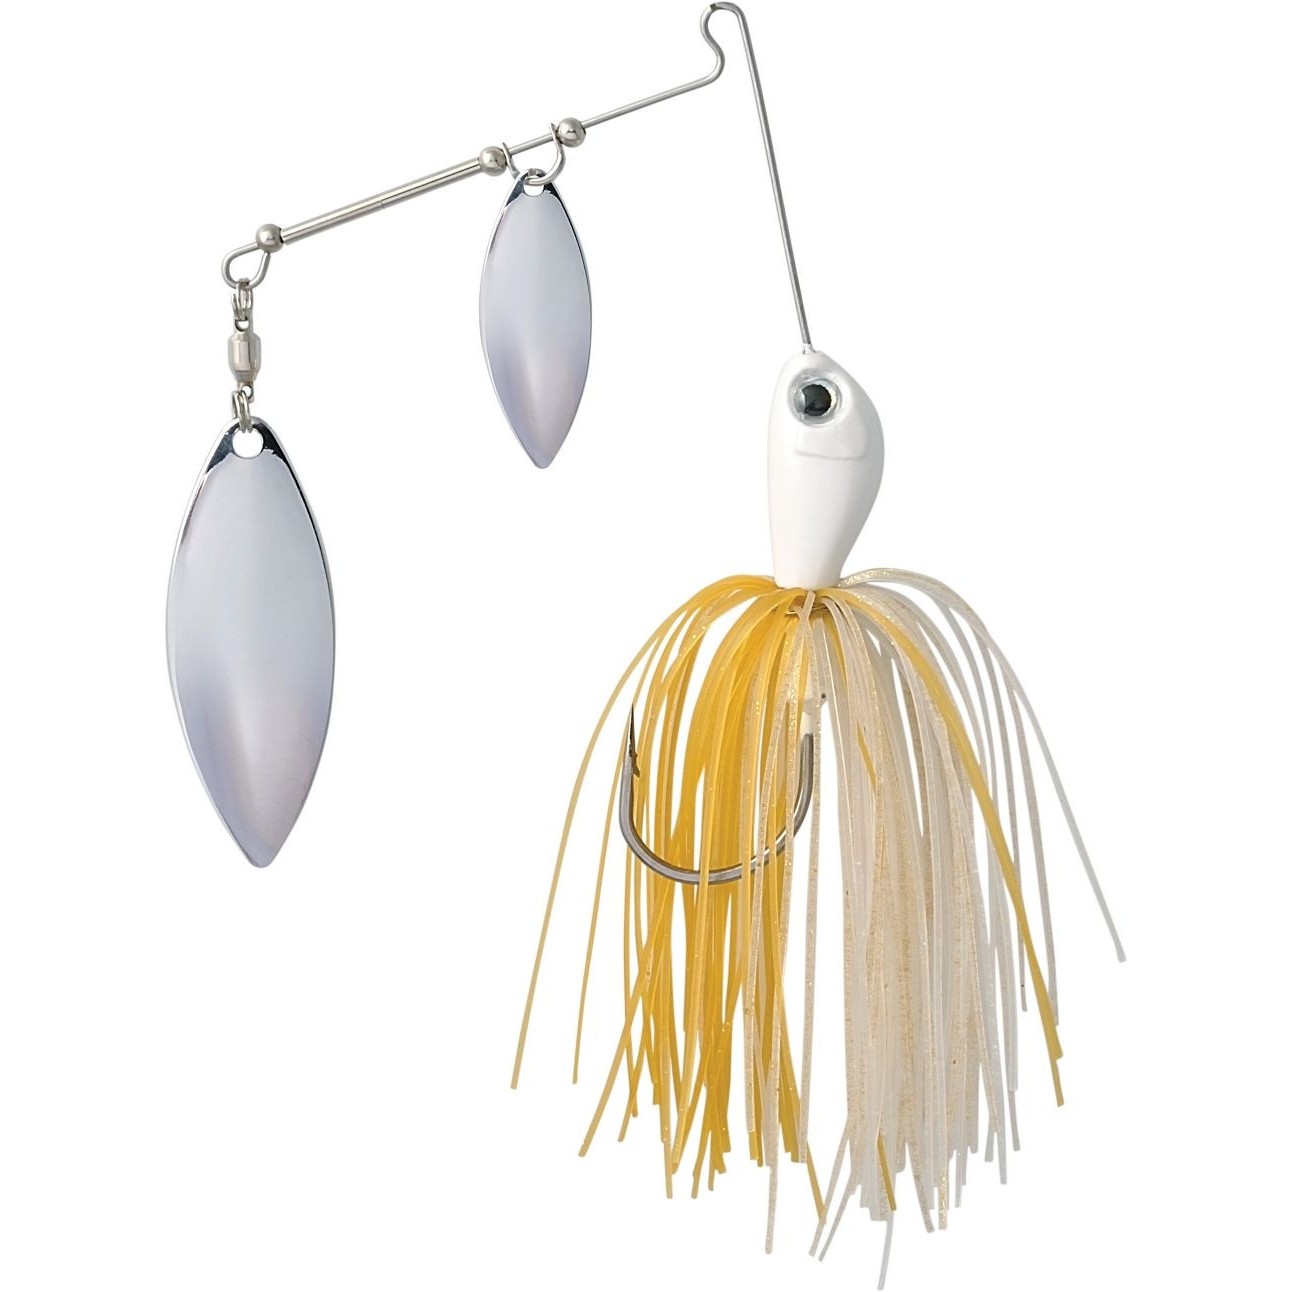 SPINNERBAIT RAPTURE SNIPER DOUBLE BLADE, SPECIAL WHITE, 14G - 188-21-201